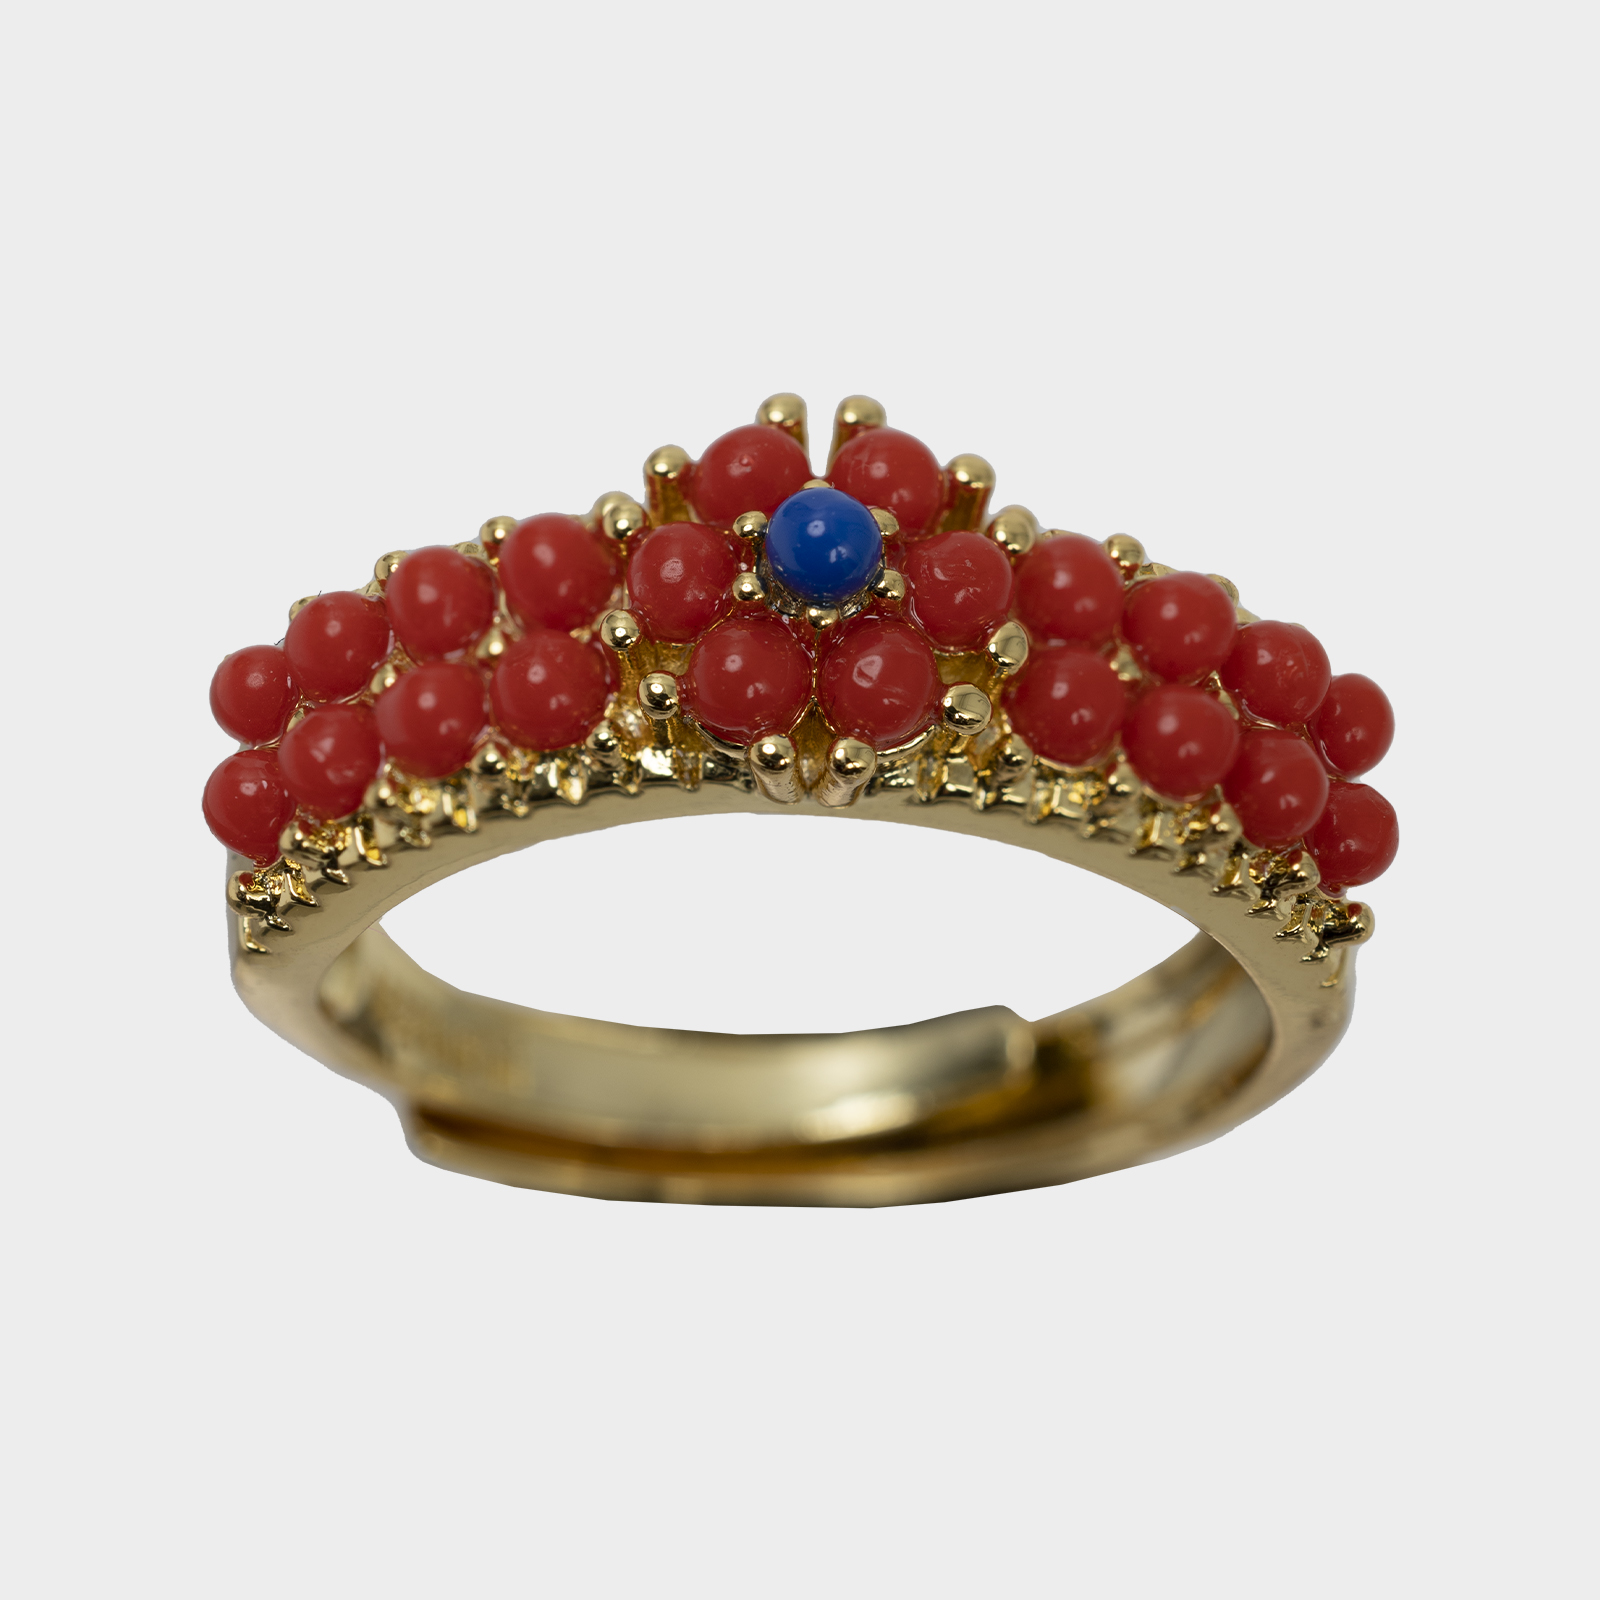 The Amazon Ring Red